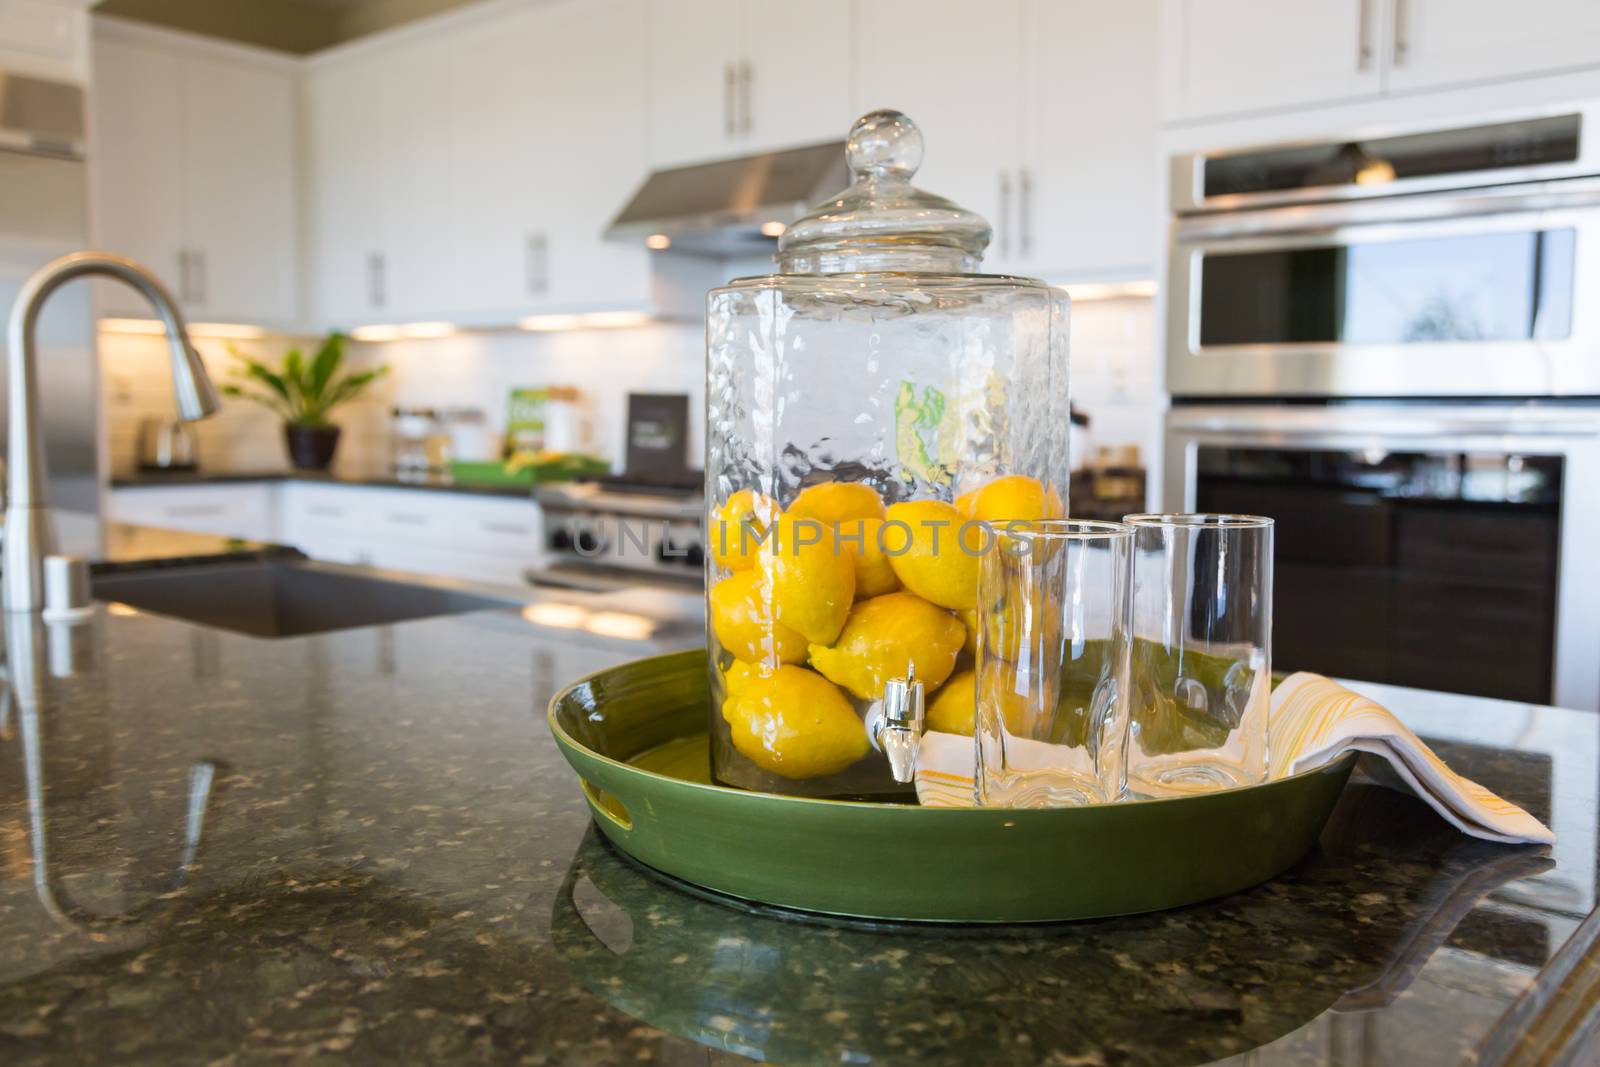 Abstract of Interior Kitchen Counter with Lemon Filled Pitcher and Drinking Glasses.